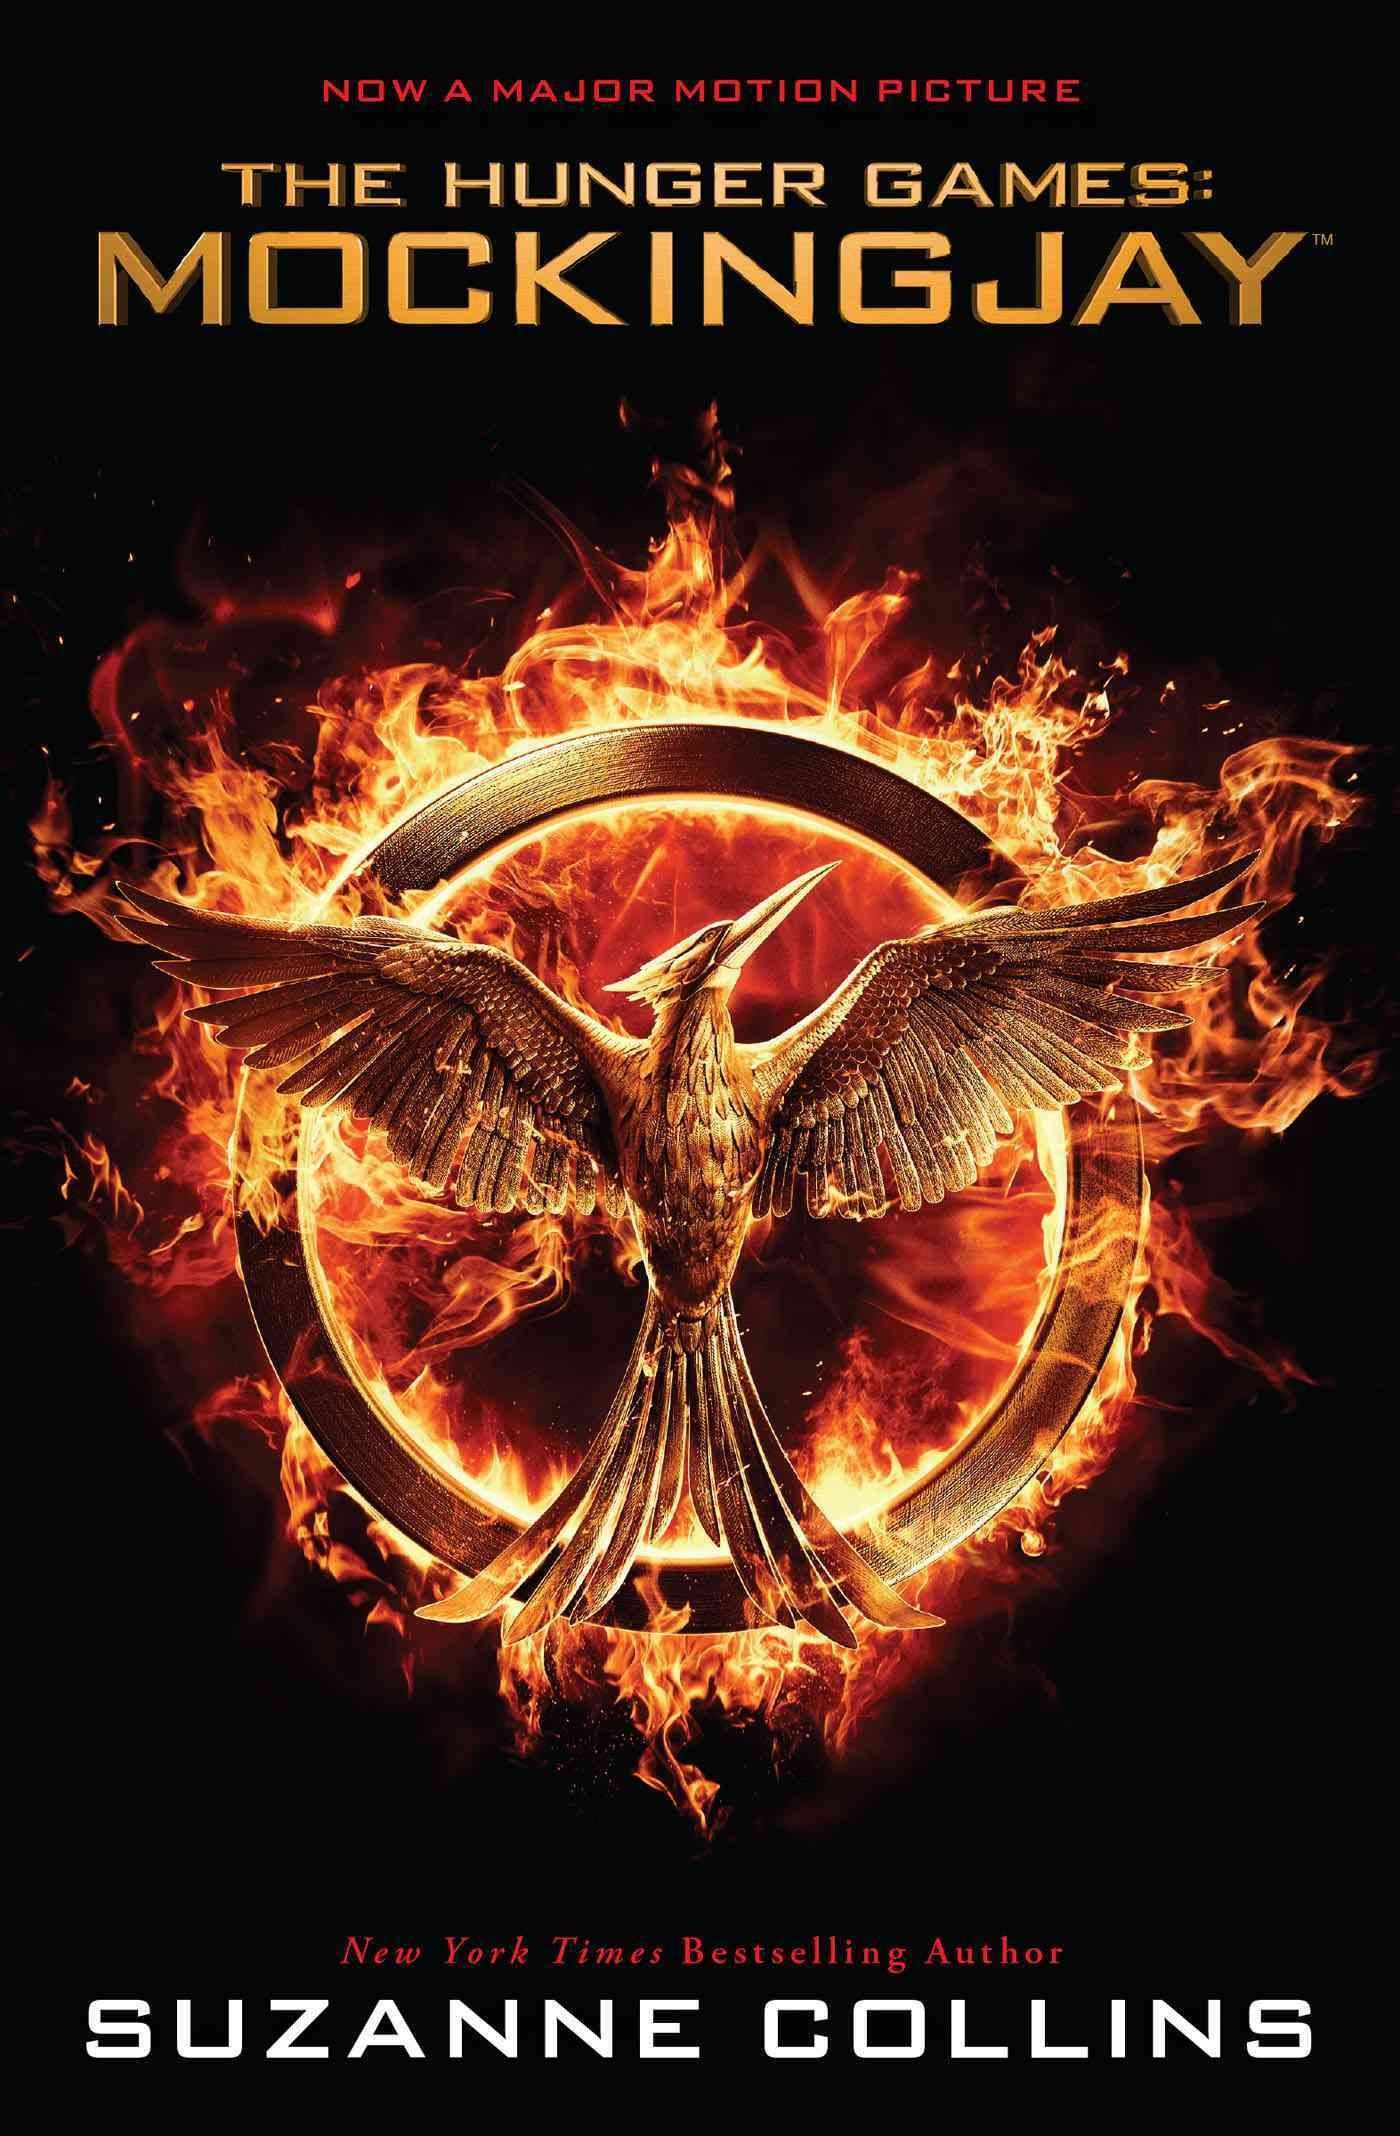 Scholastic - Celebrate The Hunger Games trilogy's 10th anniversary